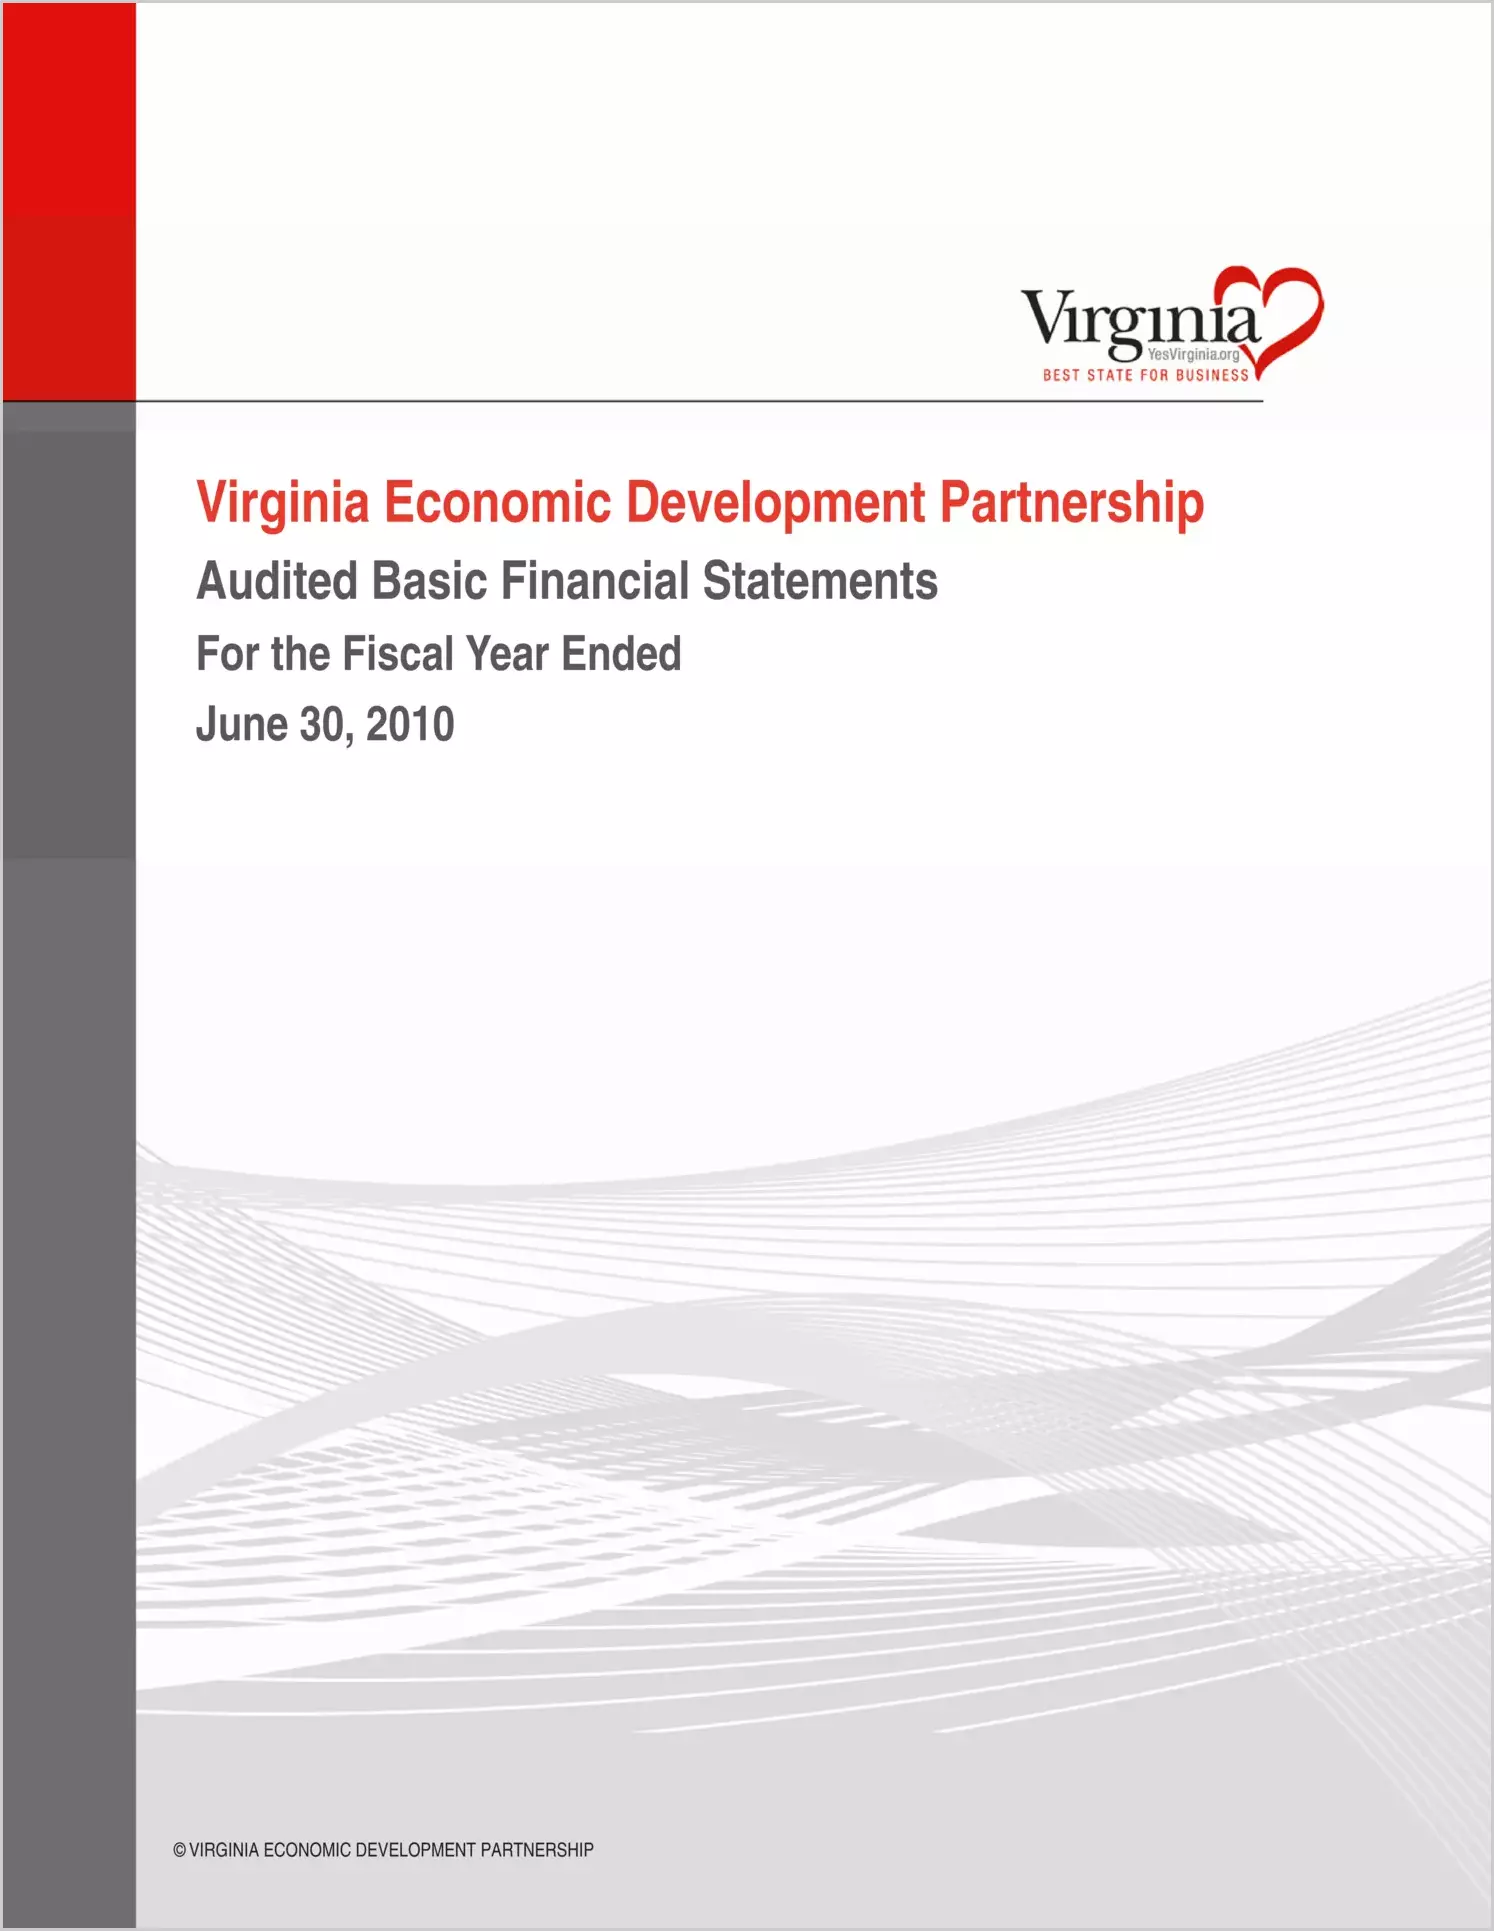 Virginia Economic Development Partnership Financial Statements Report for the year ended June 30, 2010